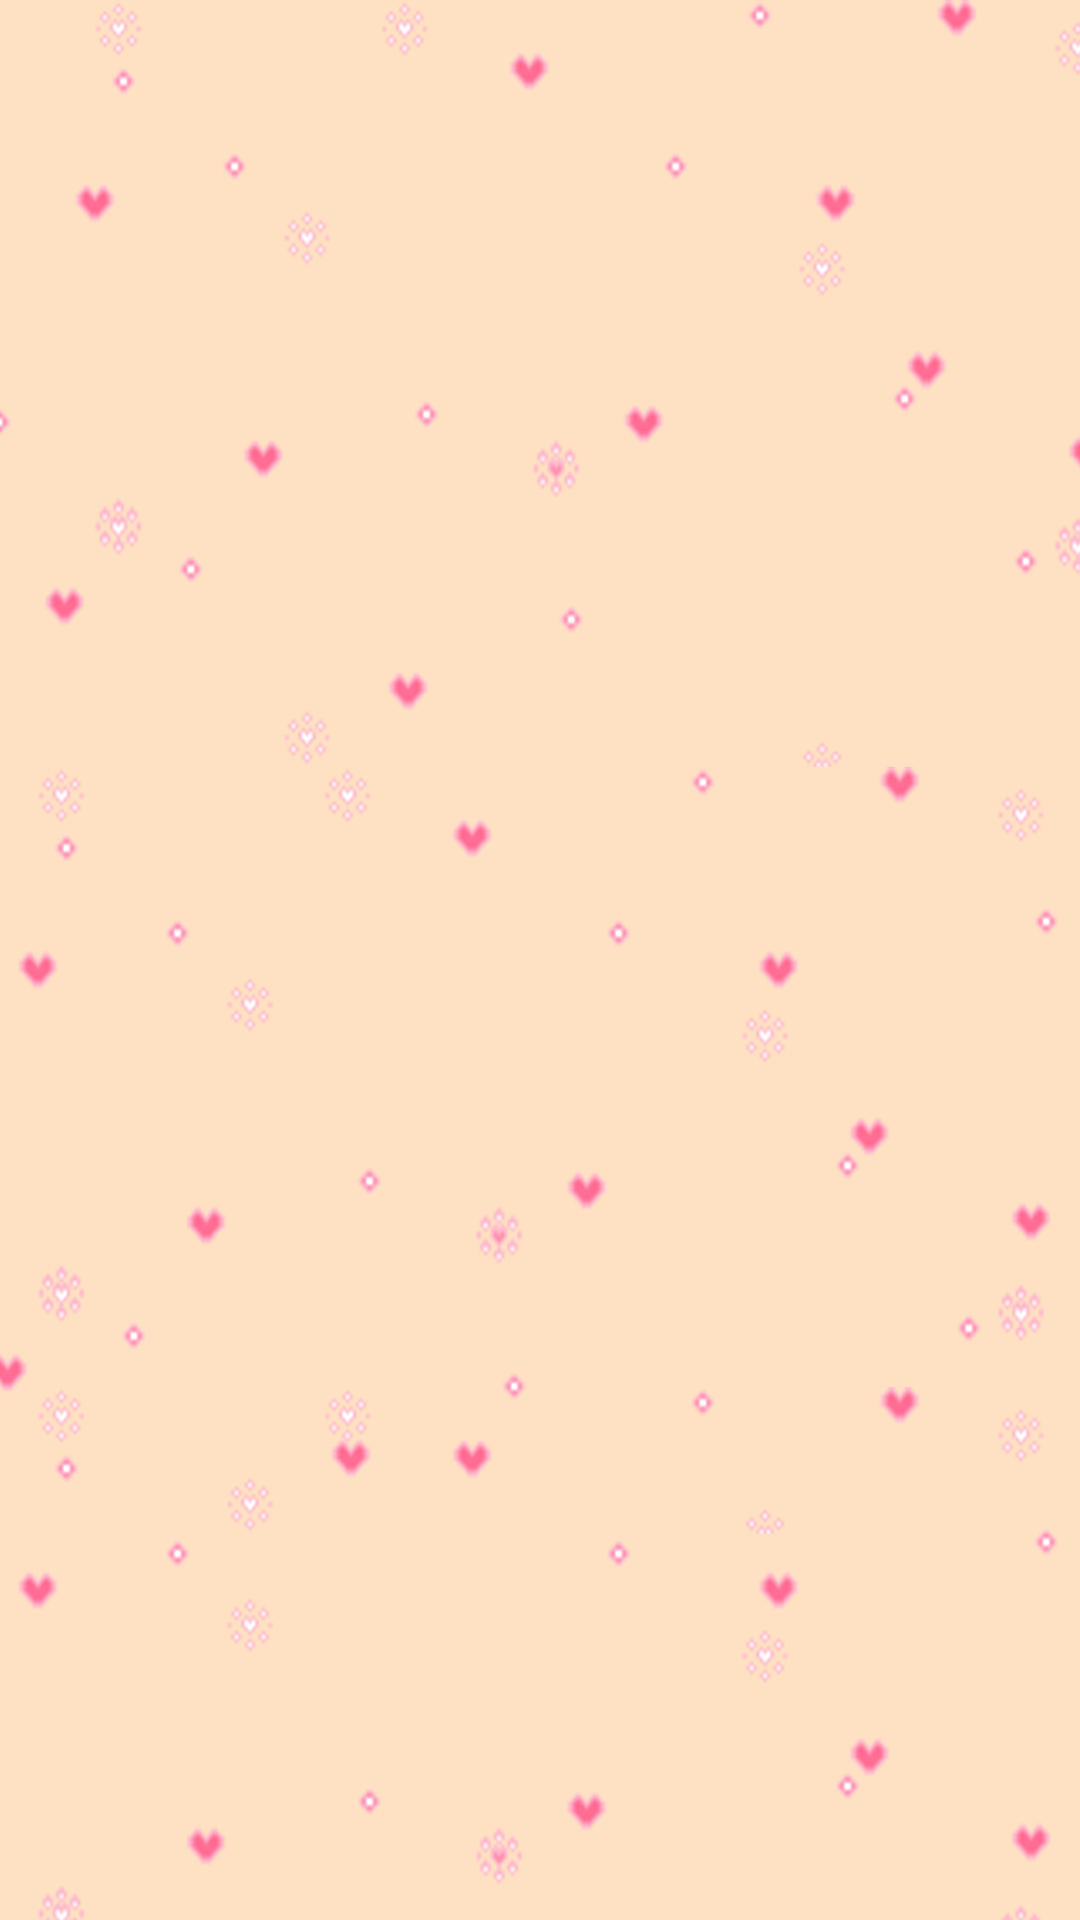 Peach Aesthetic Wallpaper Free Peach Aesthetic Background